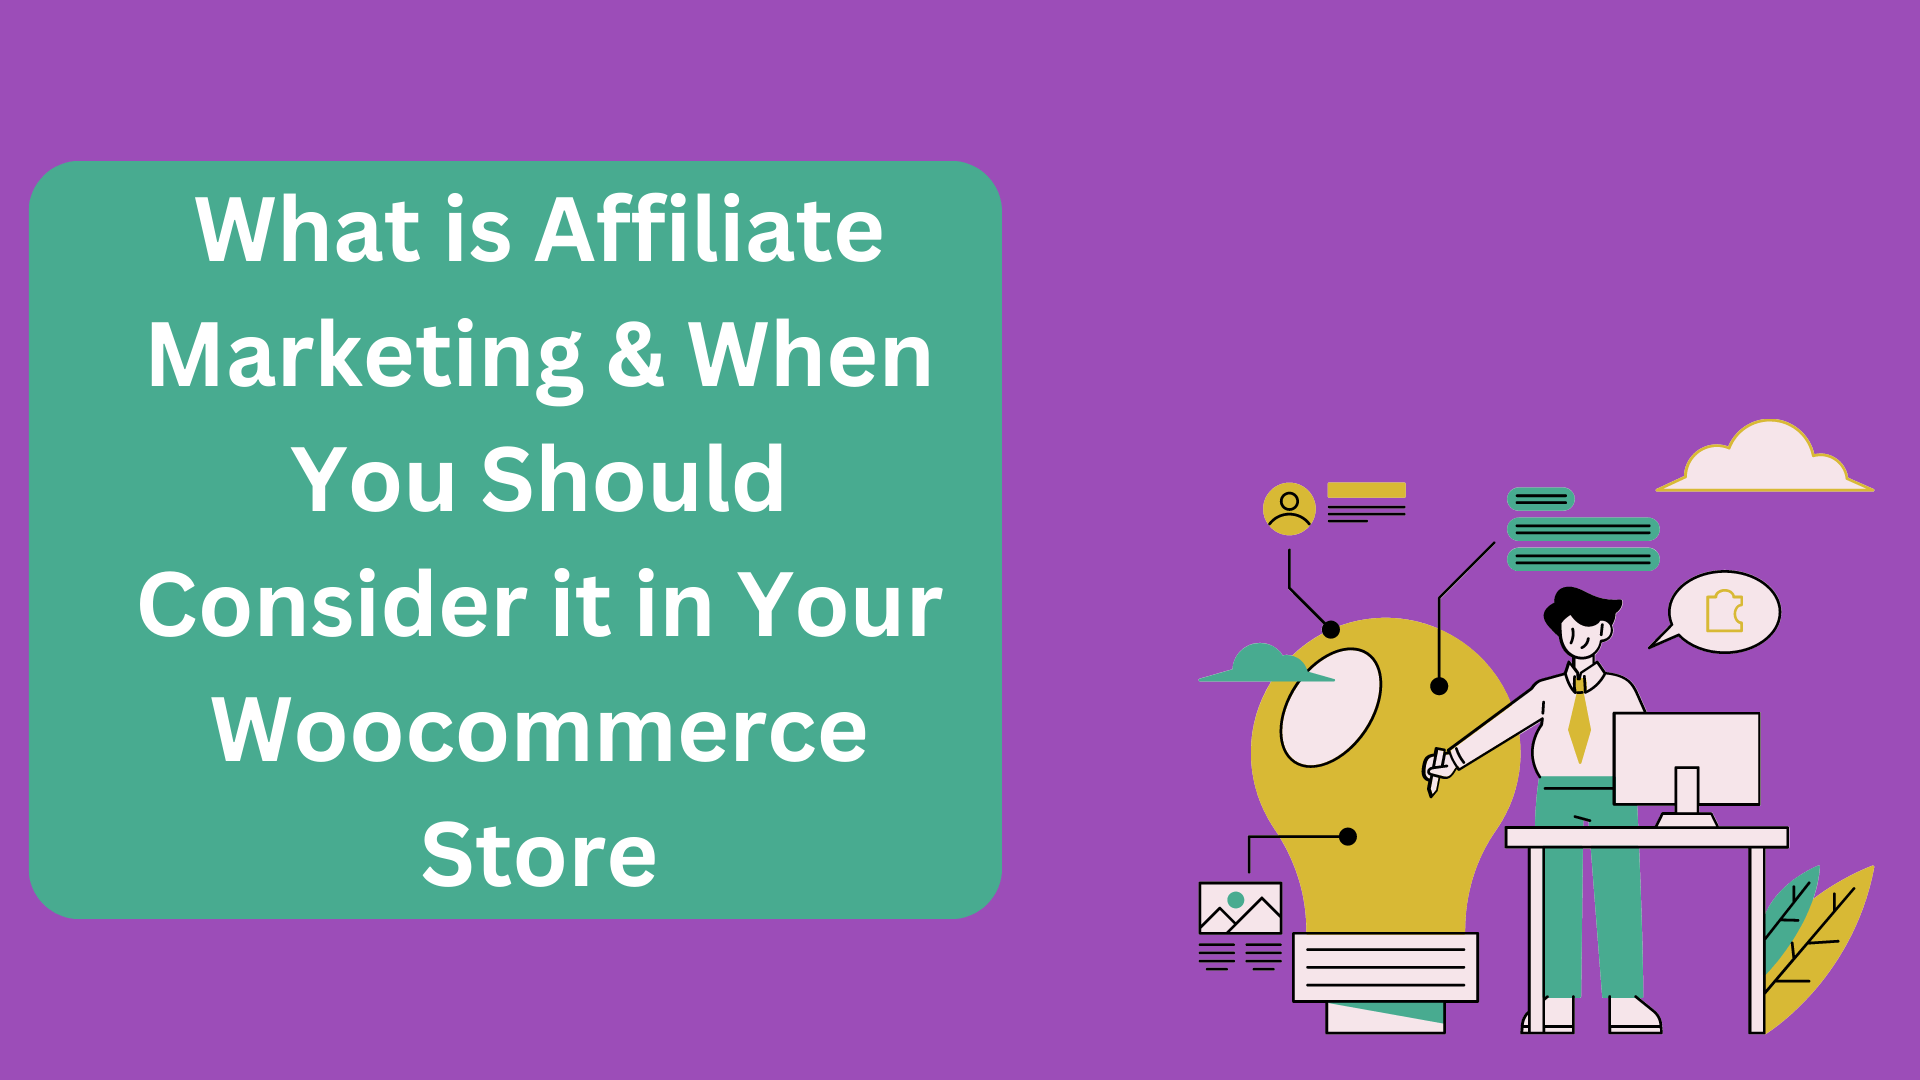 What is Affiliate Marketing & When You Should Consider it in Your Woocommerce Store